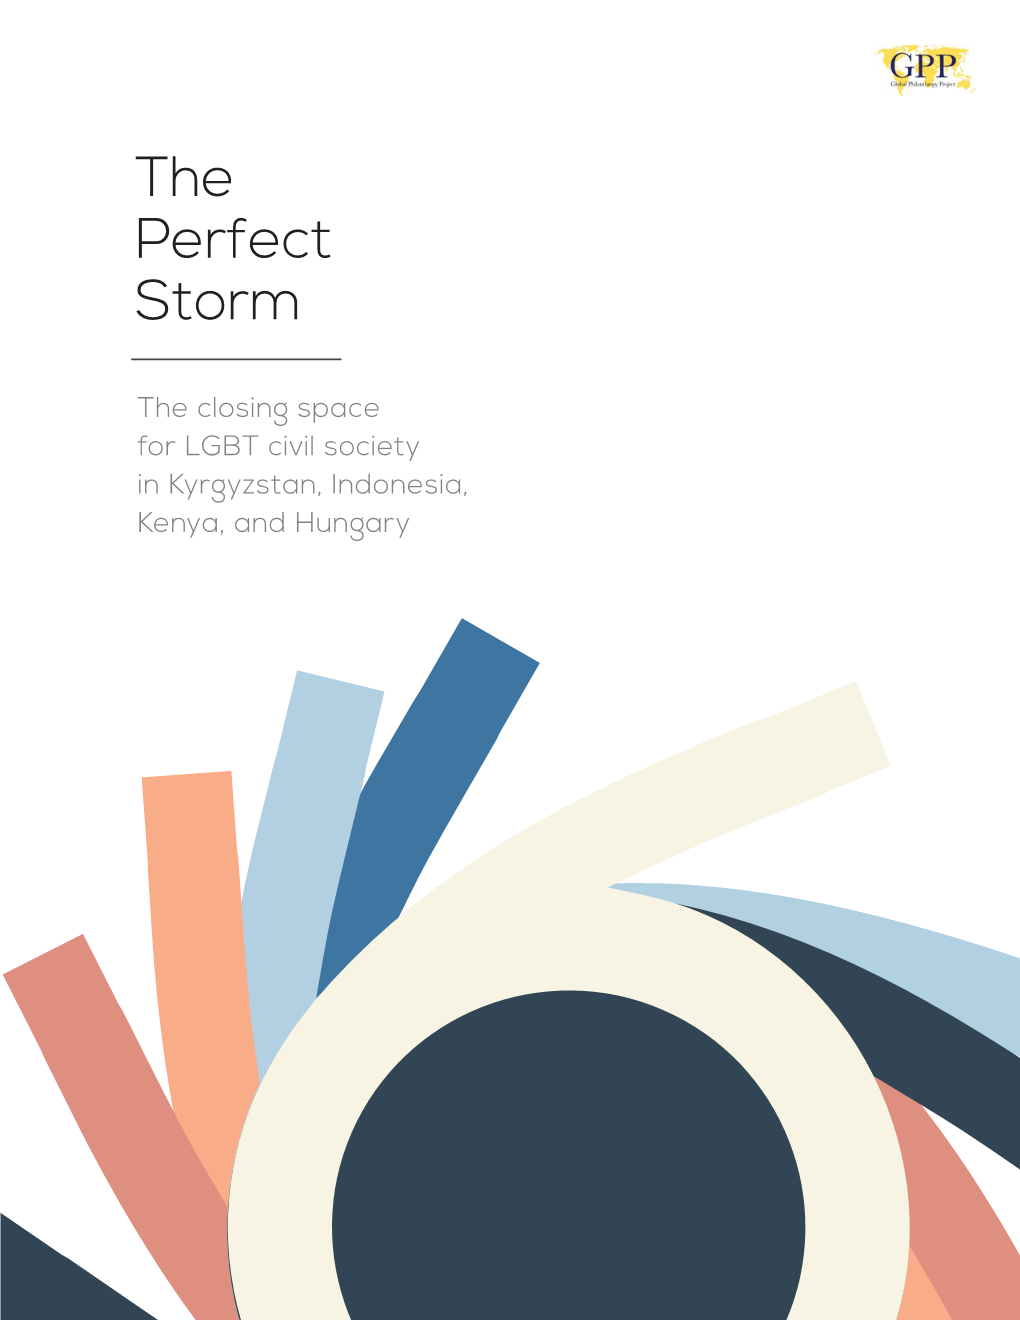 The Perfect Storm: the Closing Space for LGBT Civil Society In